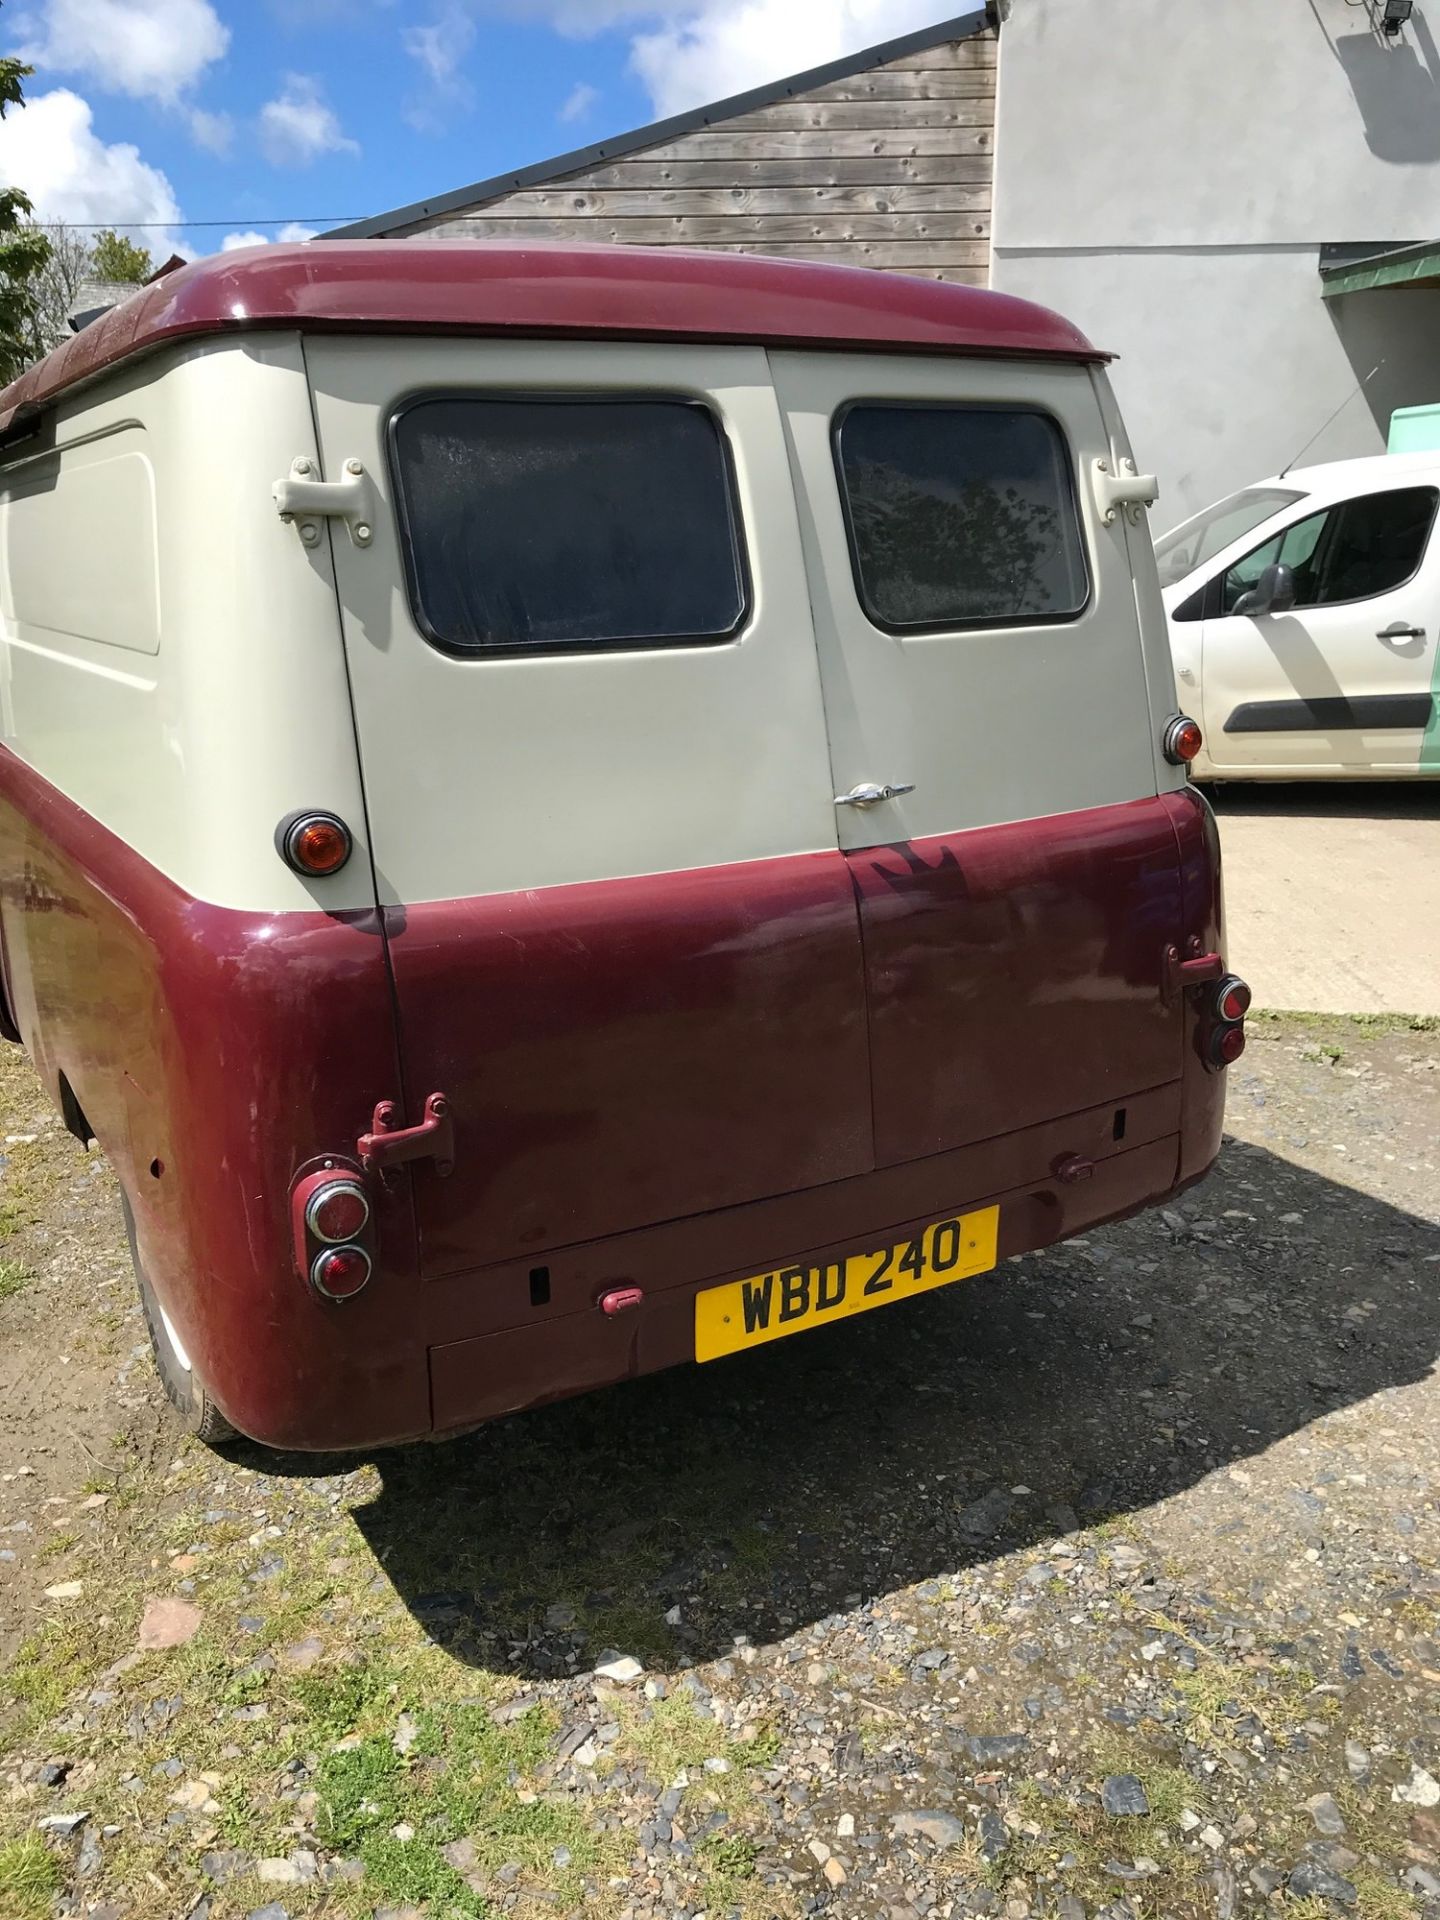 1960 Bedford CA Van Registration number WBD 240 Red and cream Long wheel base Bought & restored 12 - Image 5 of 20